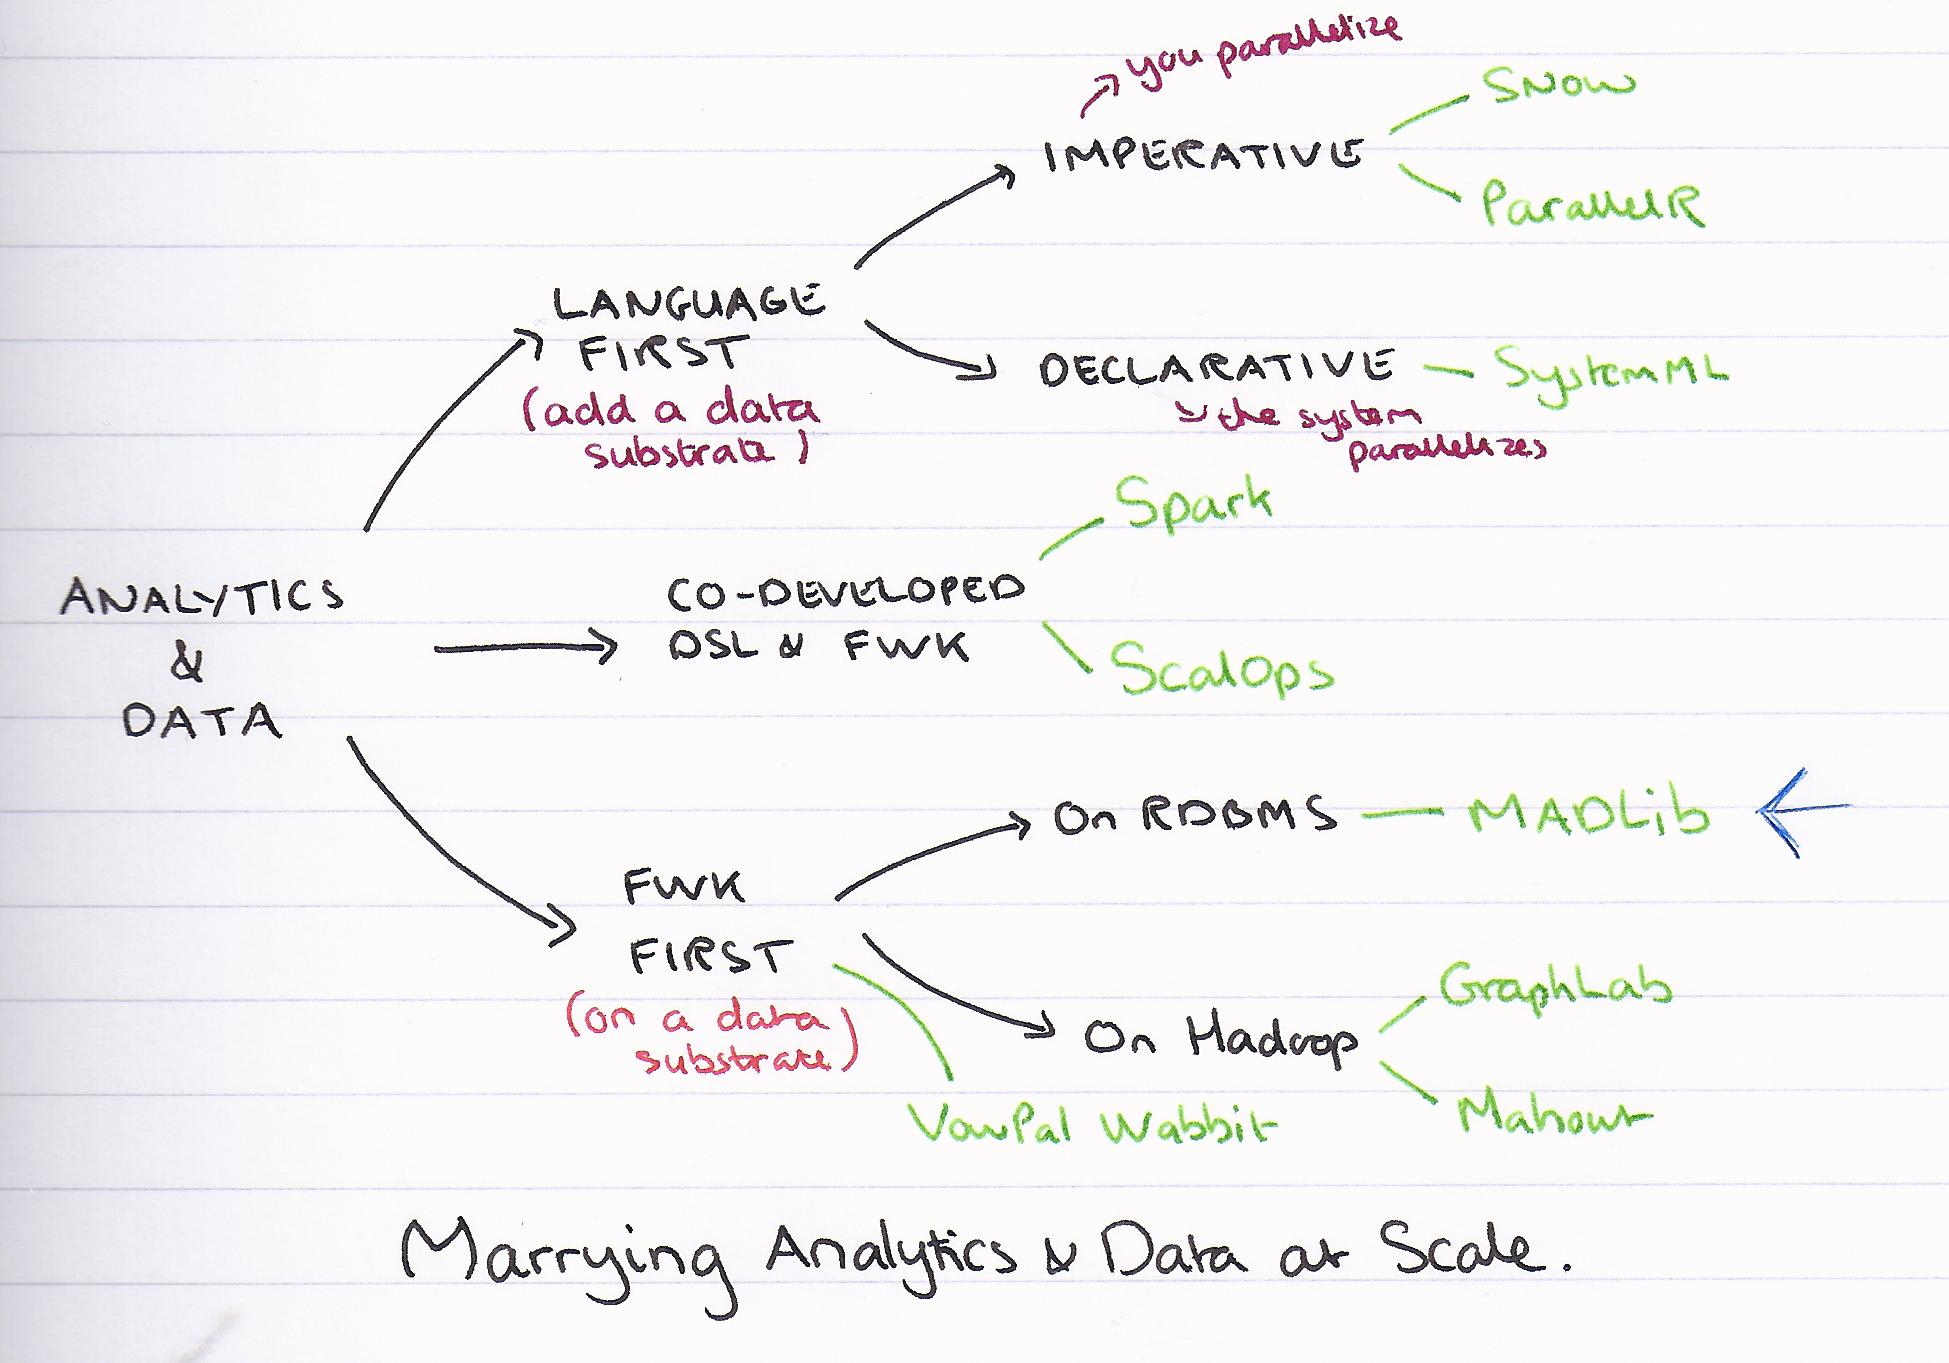 Family tree of analytic and data approaches